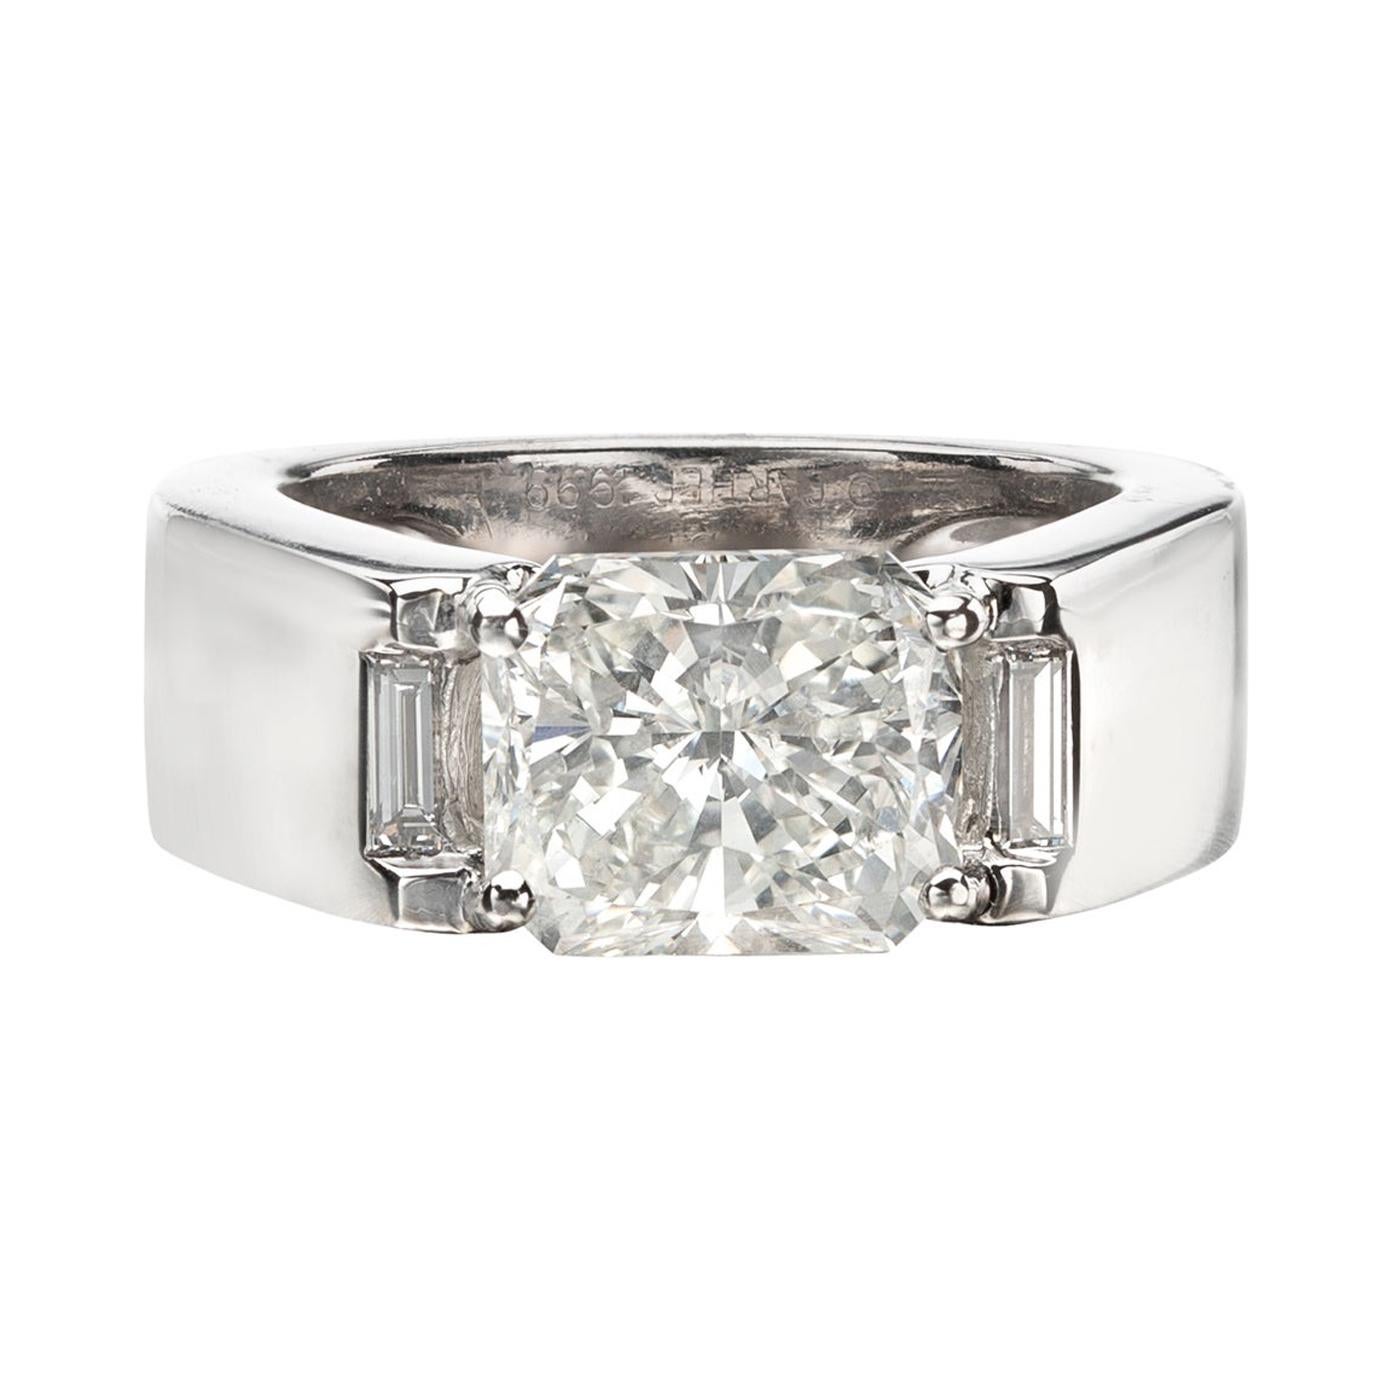 GIA 3.01-Ct H/SI1 Radiant Diamond in Cartier Ring